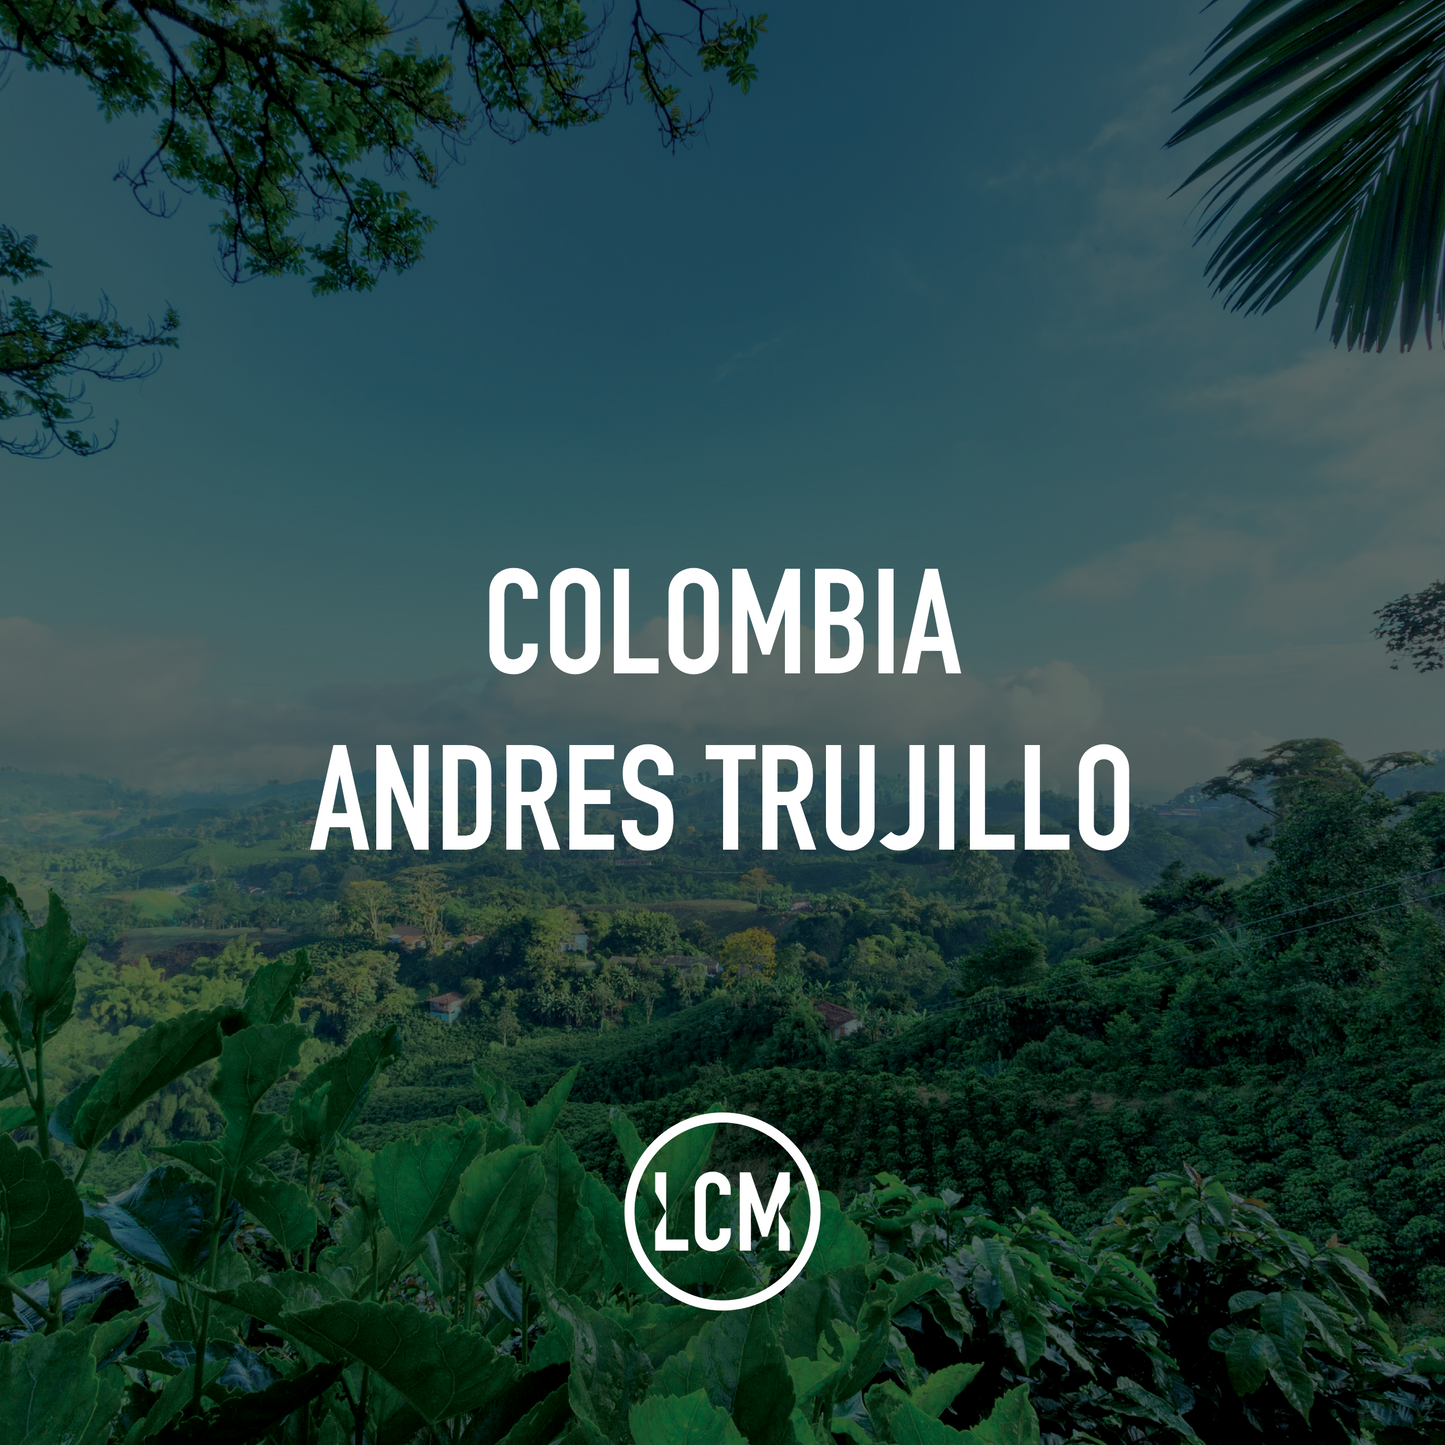 Colombia Andres Trujillo Natural 70kg